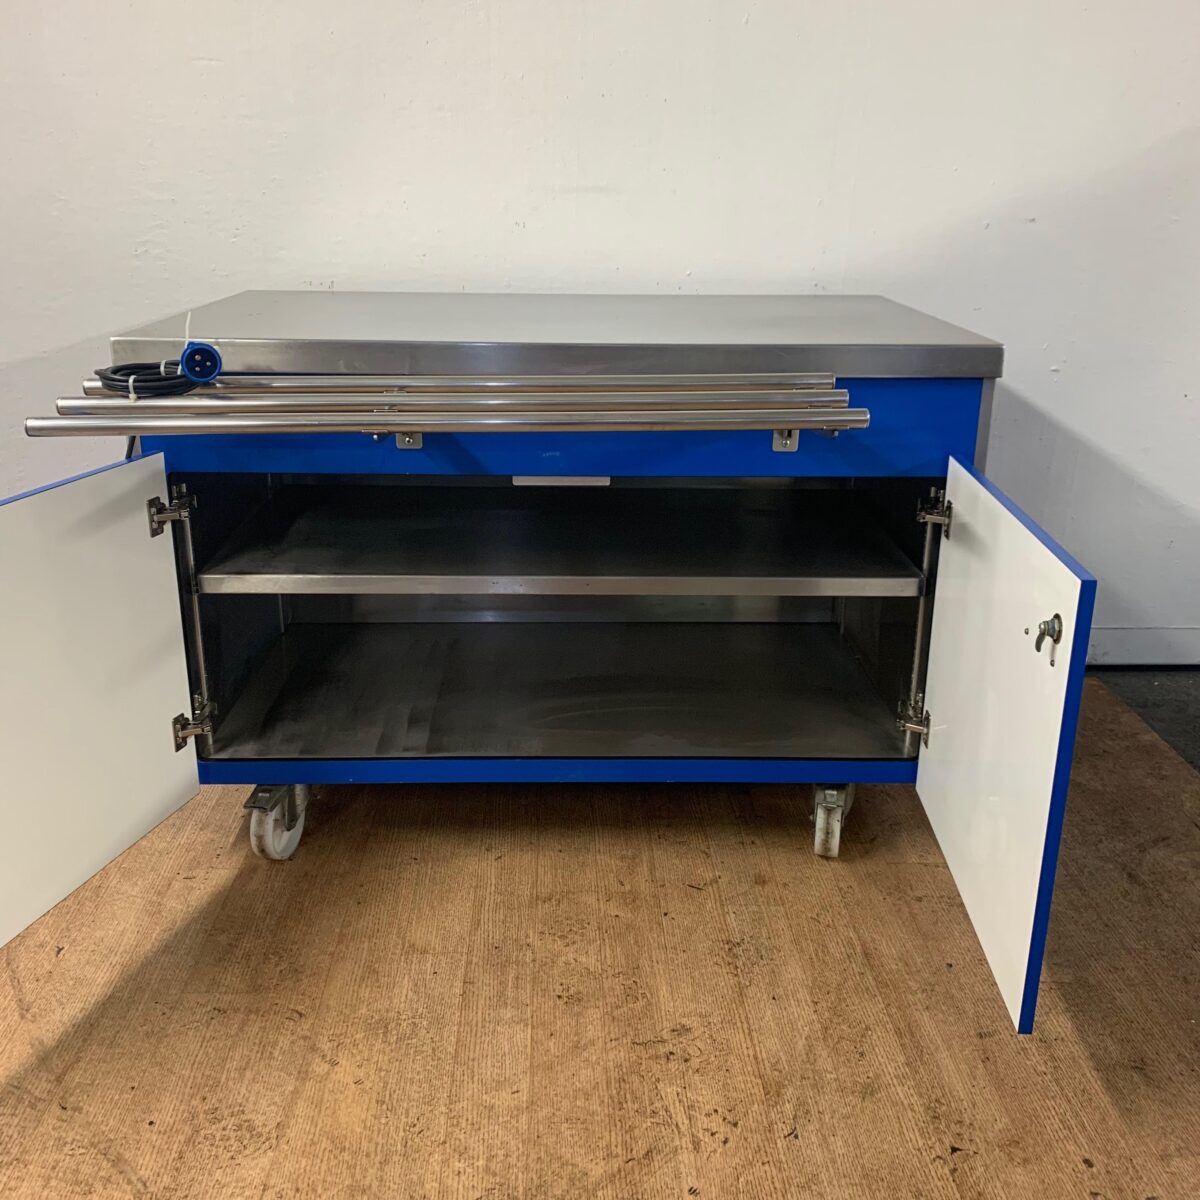 Used   Stainless steel top cabinet with tray slide and power sockets 131cmW x 79cmD x 89cmH